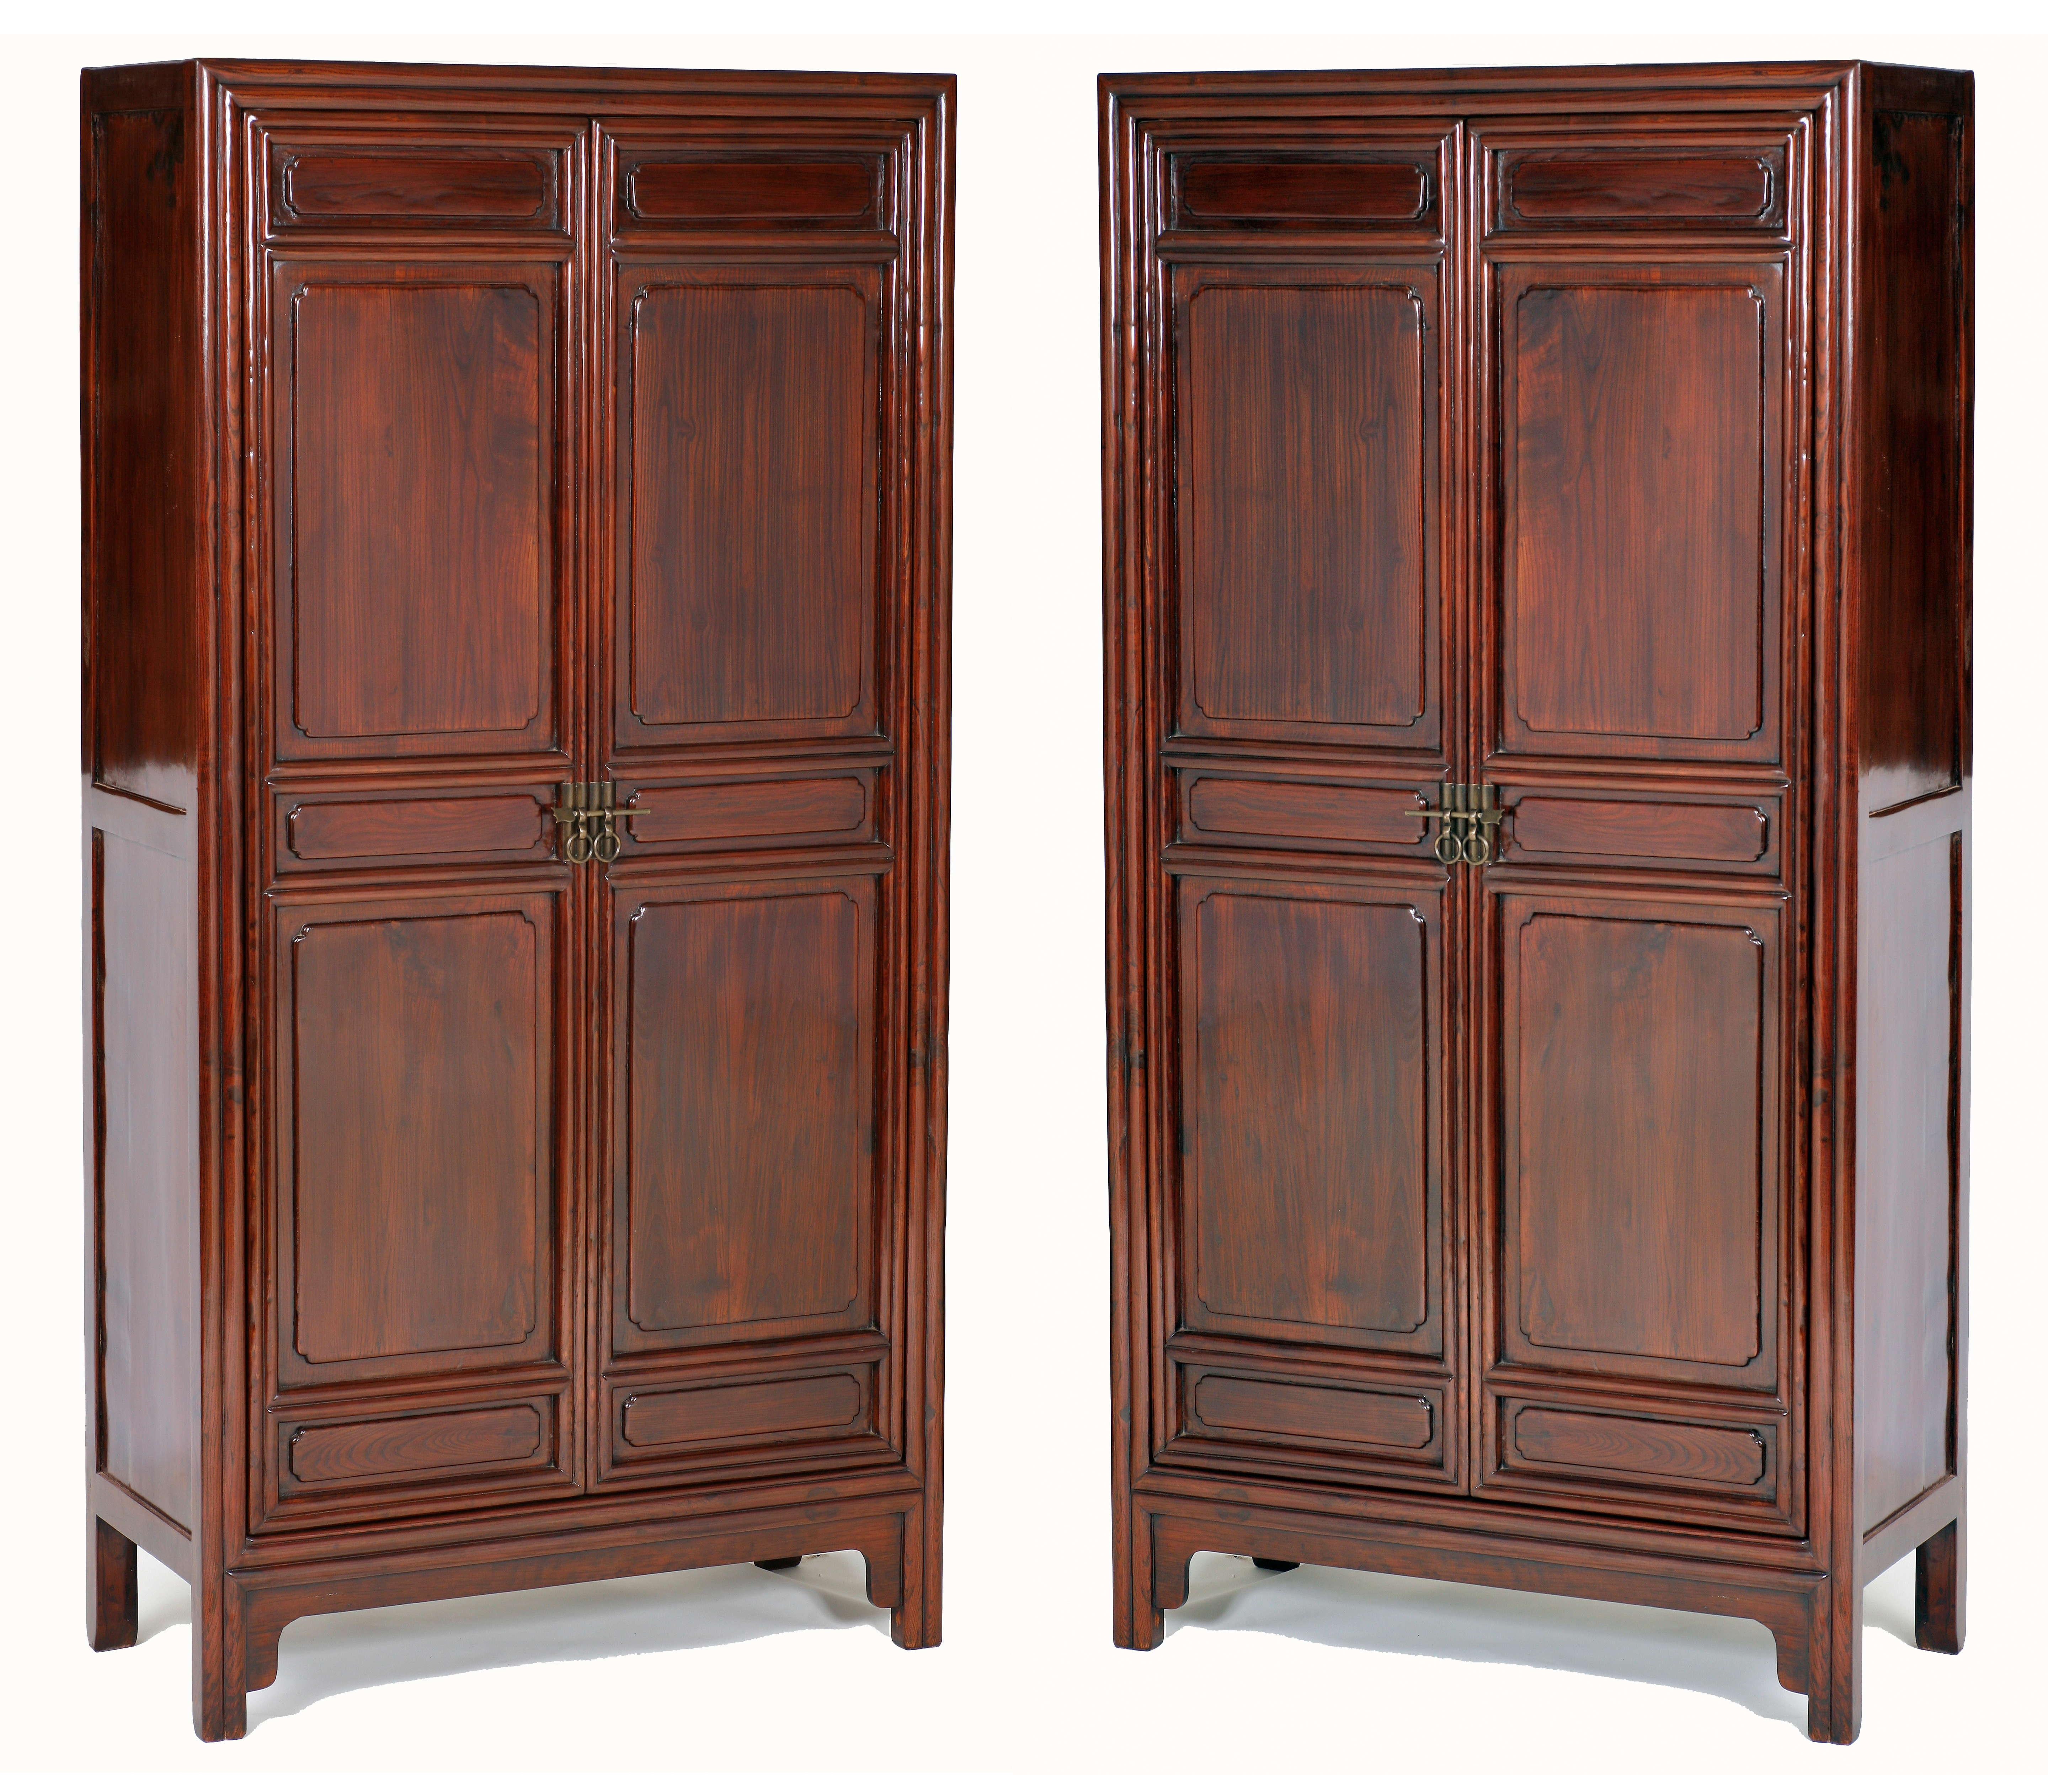 The wonderful pair of square corner cabinets, carved with lipped moulding on the front posts, two doors decorated in sections with carved embossed cartouches within the carved lipped mouled frames, the doors opening to a top shelf, a mid-shelf